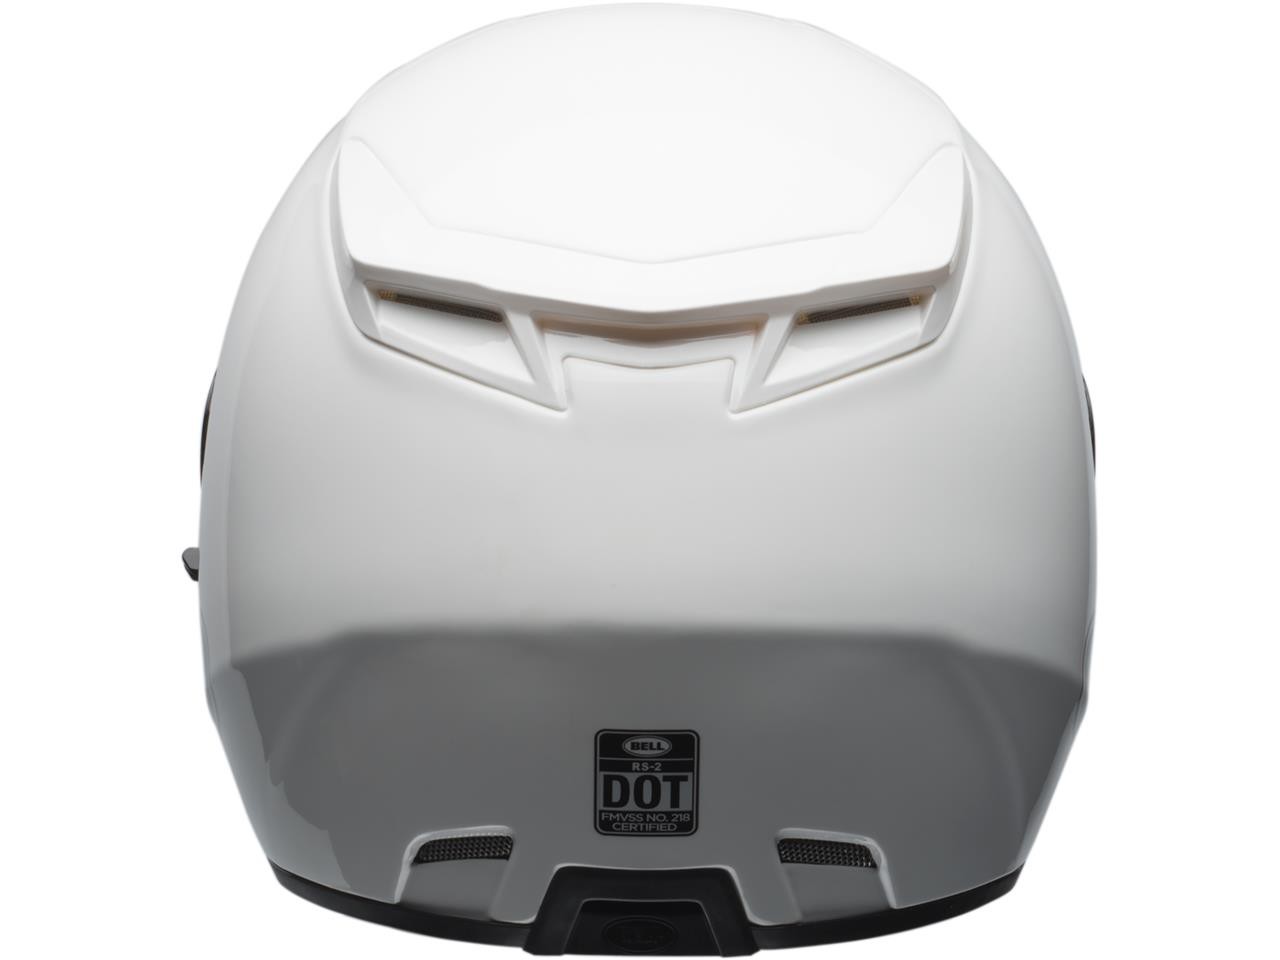 Casque Moto BELL RS-2 SOLID WHITE